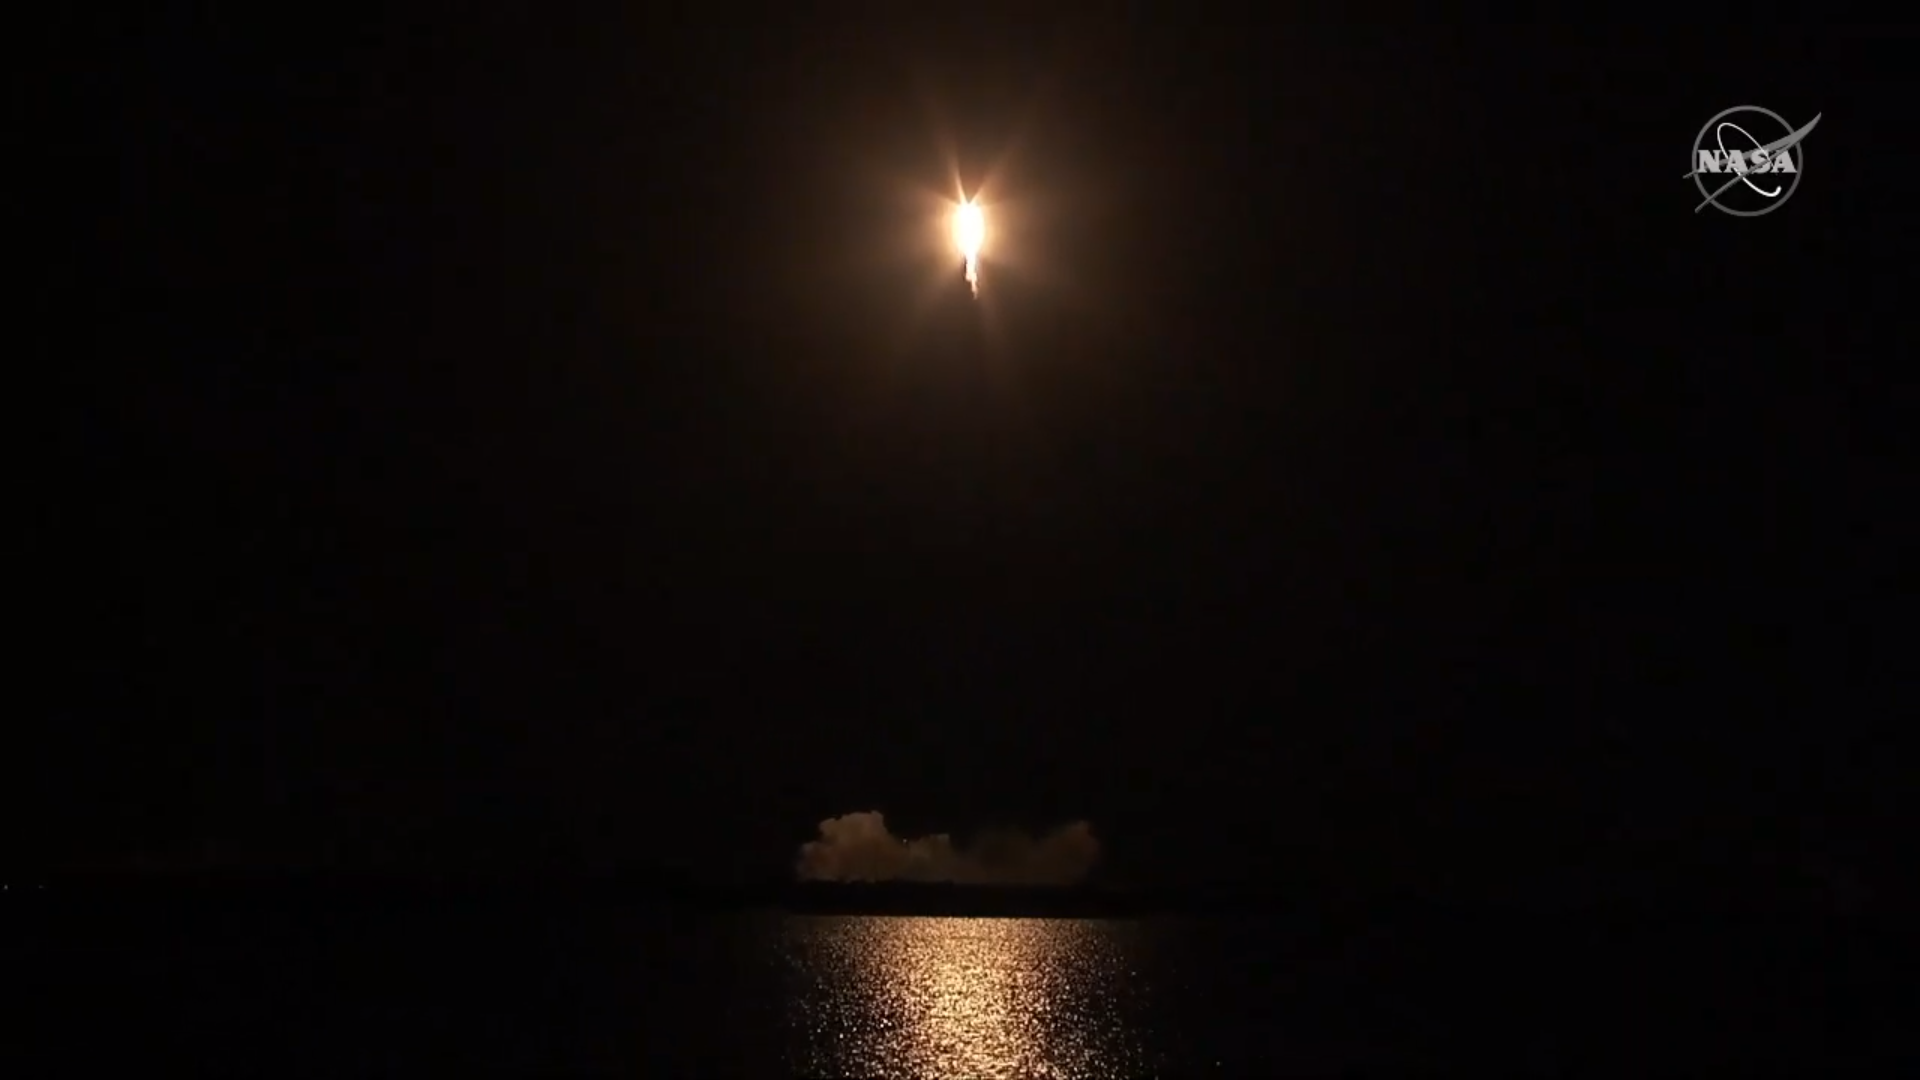 SpaceX Dragon cargo spacecraft launches on a Falcon 9 rocket from Space Launch Complex 40